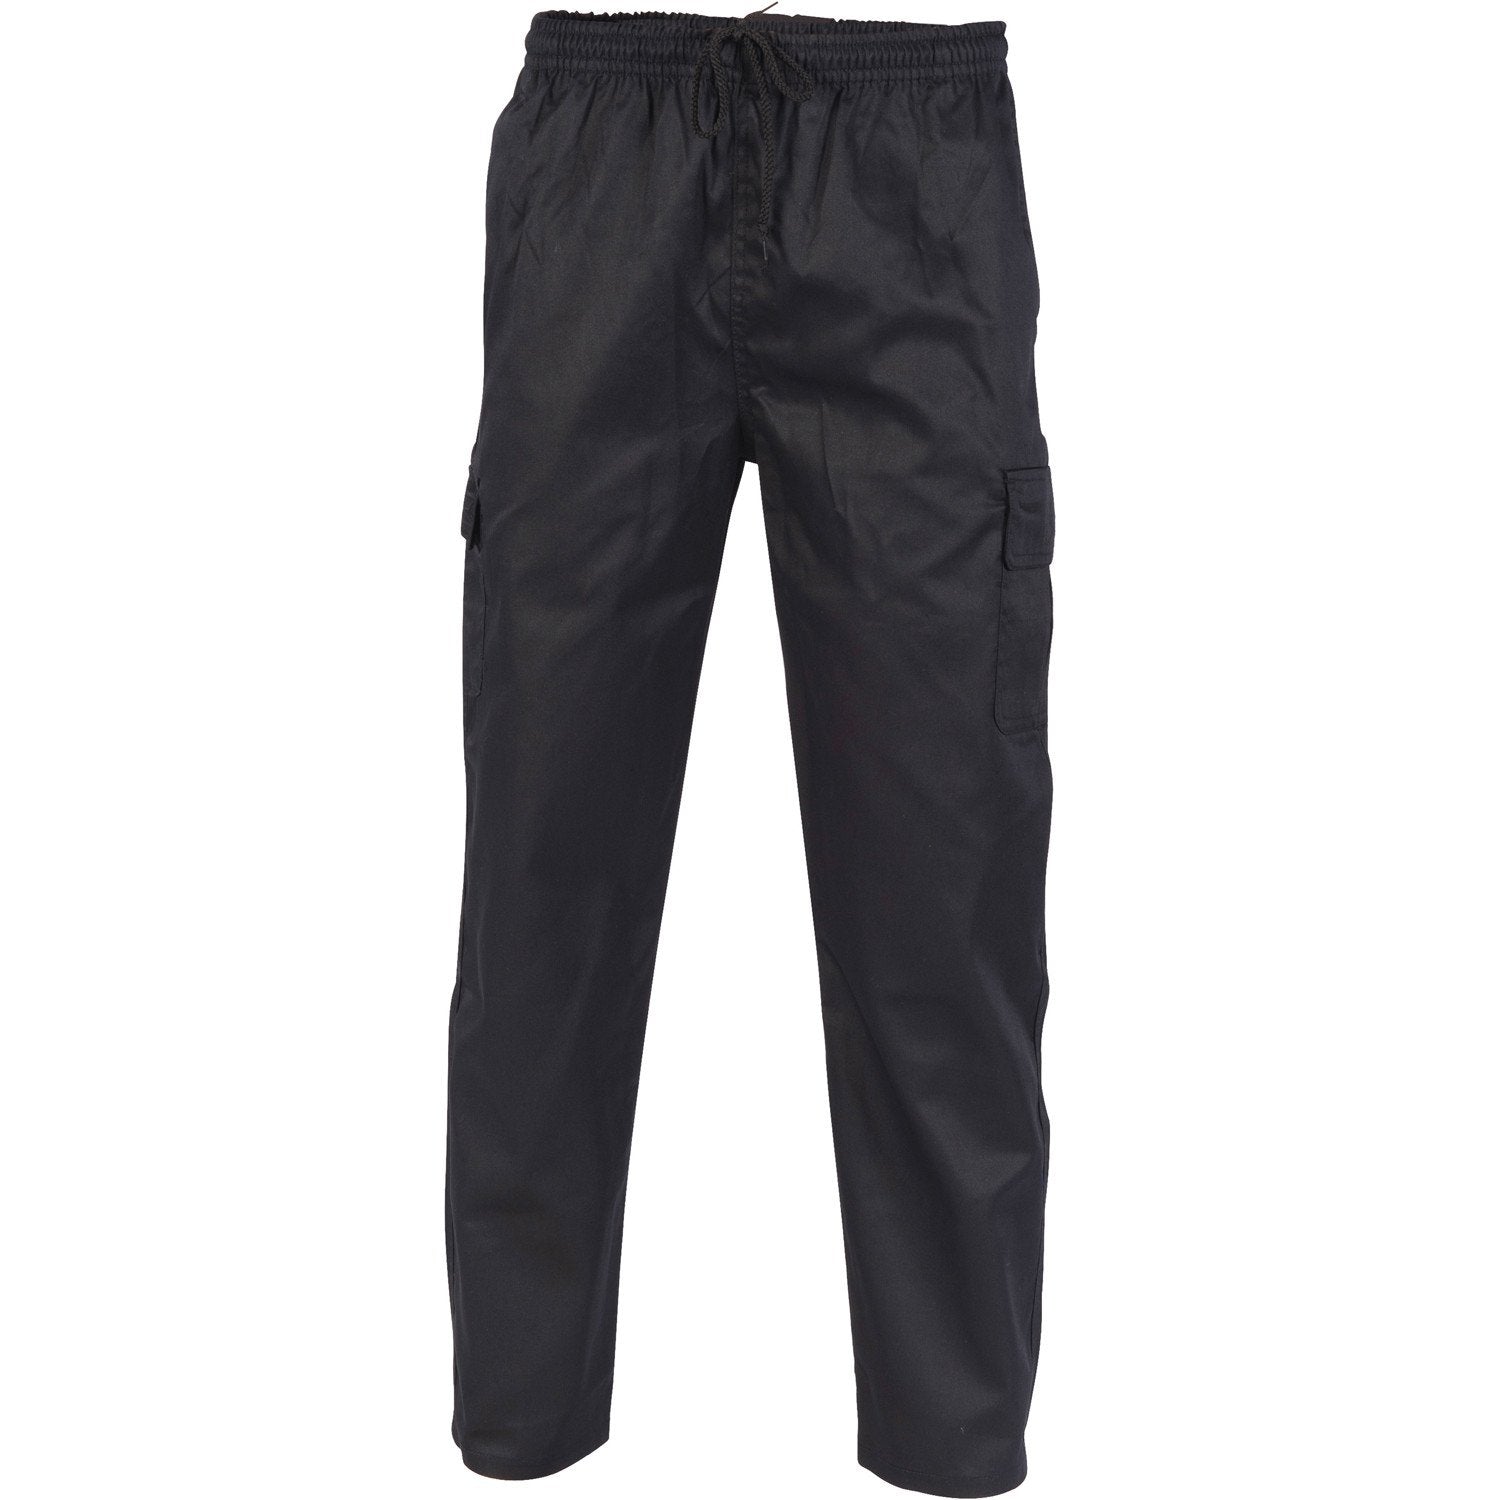 Buy Superdry Black Organic Cotton Slim Cargo Pants from the Next UK online  shop